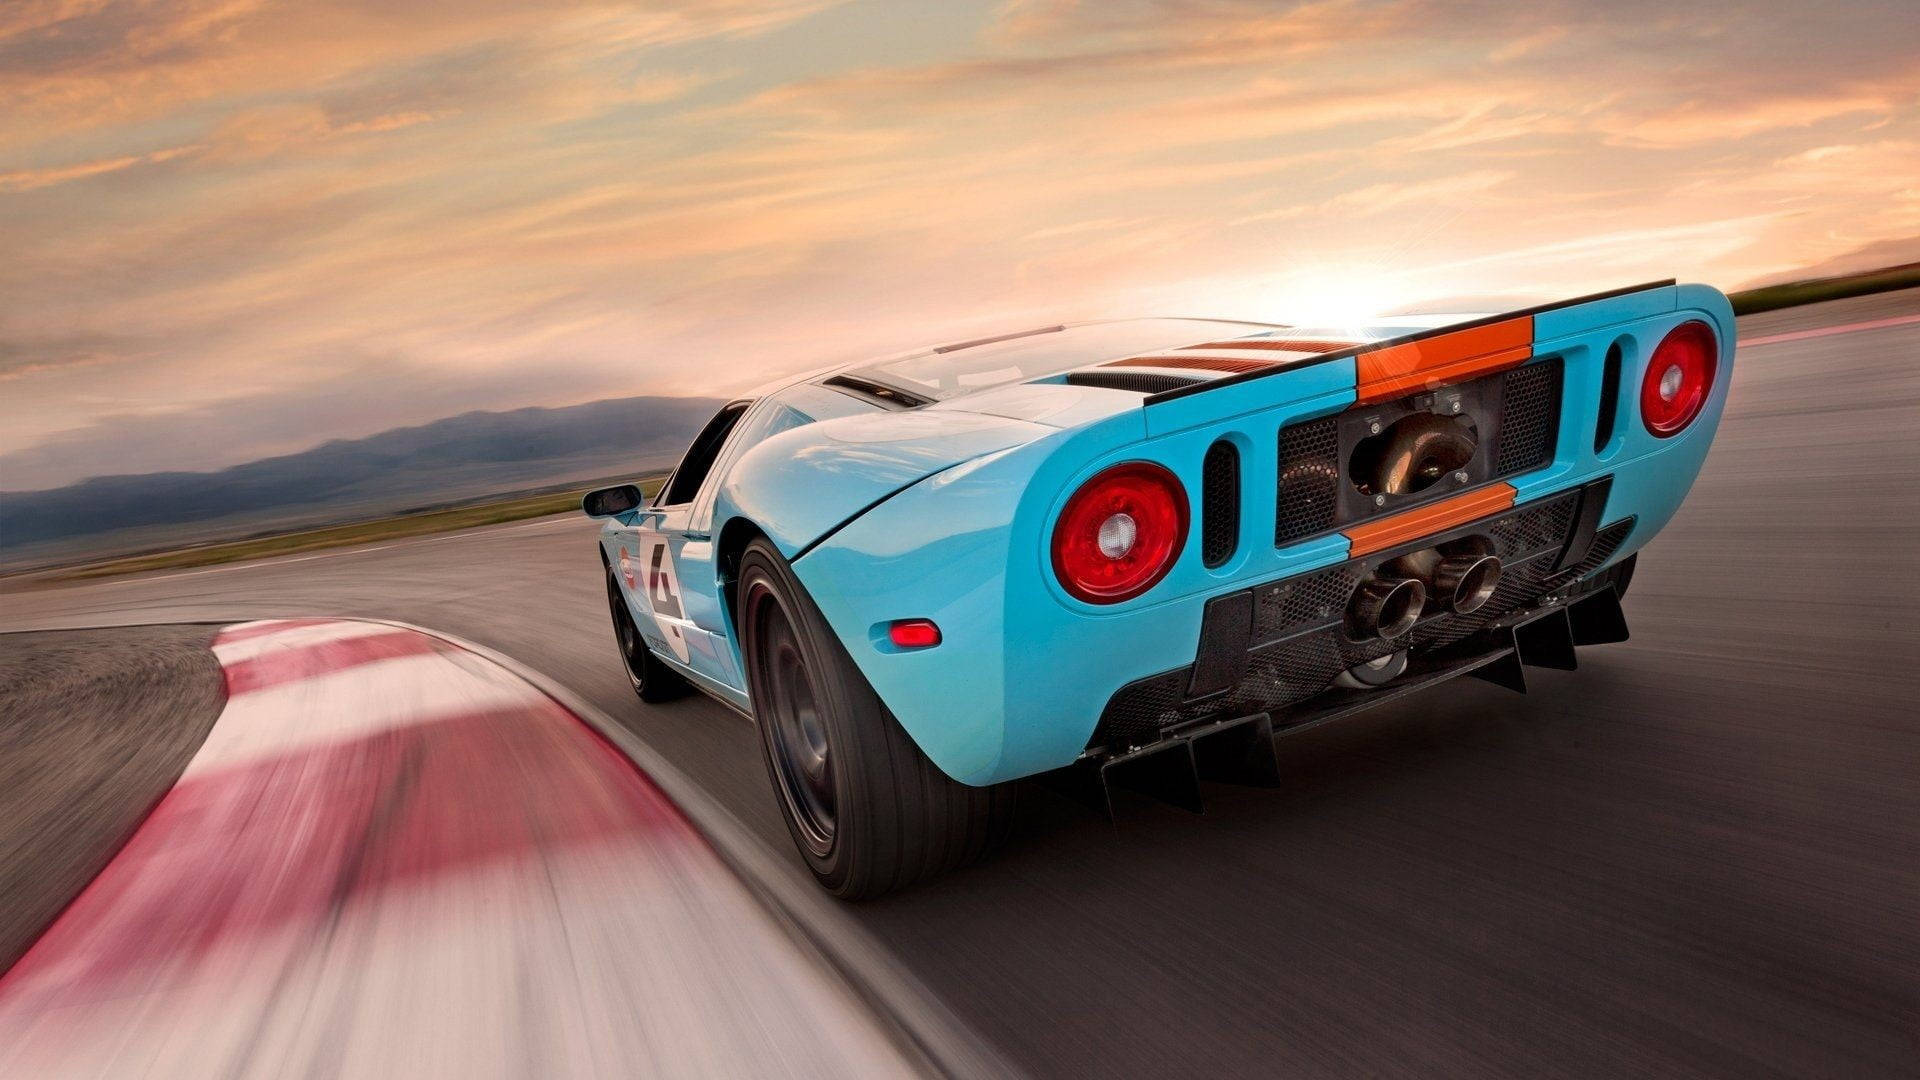 Blue Sports Car On The Road Wallpaper